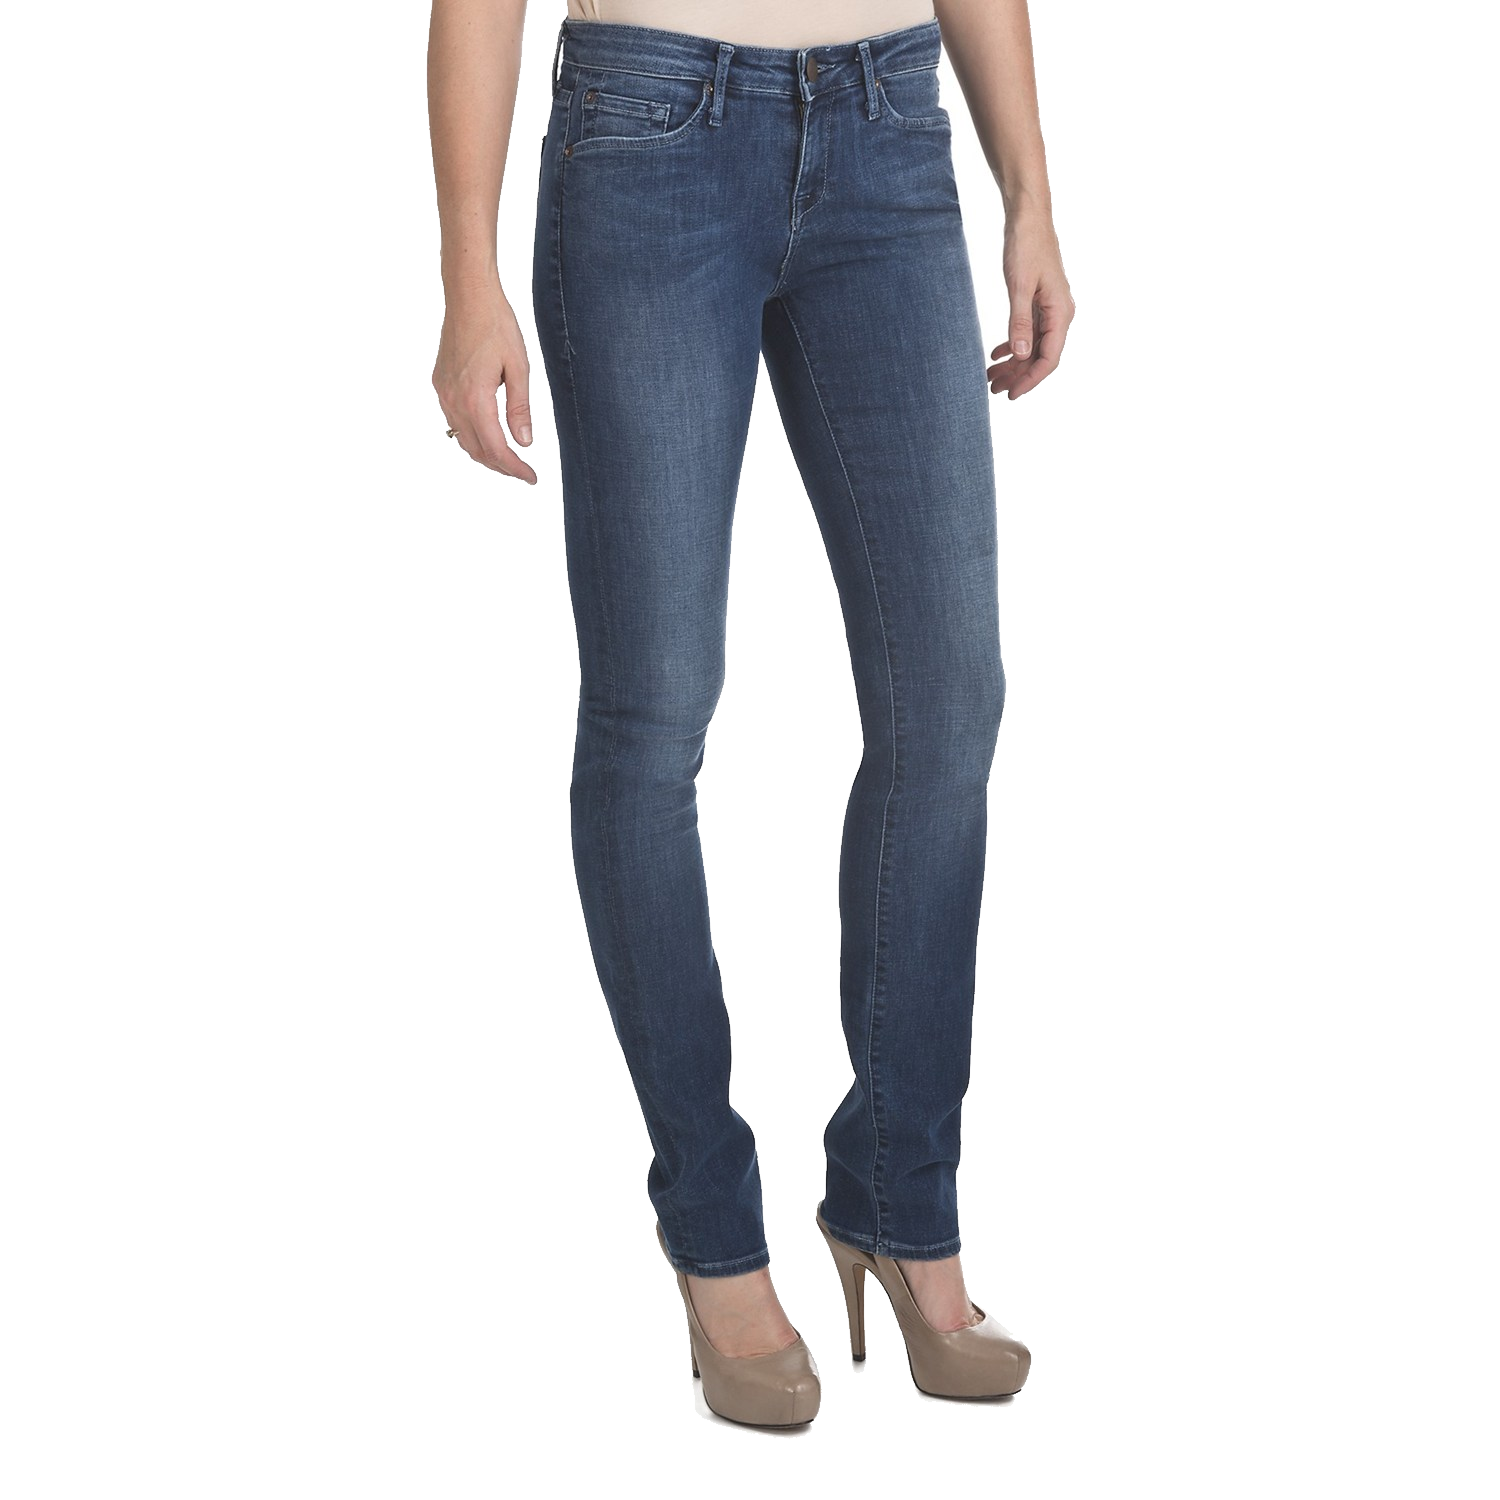 Skinny Jeans PNG Free Photo PNG Image